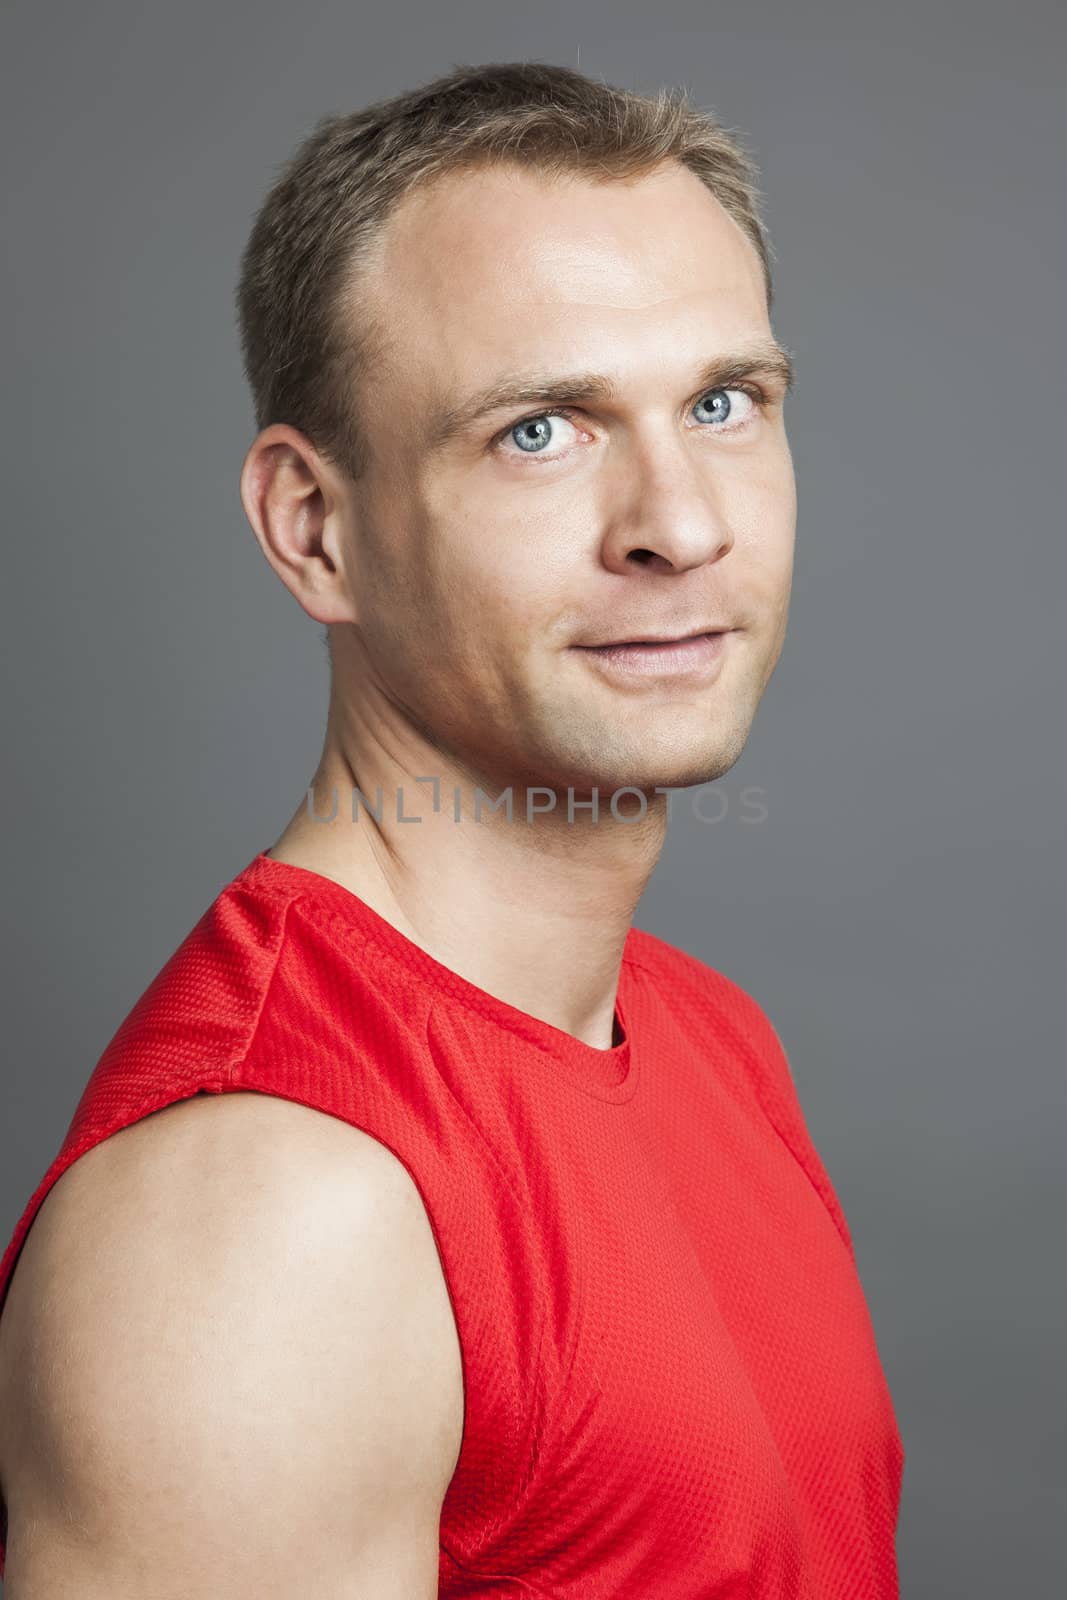 An image of a handsome man with a red shirt